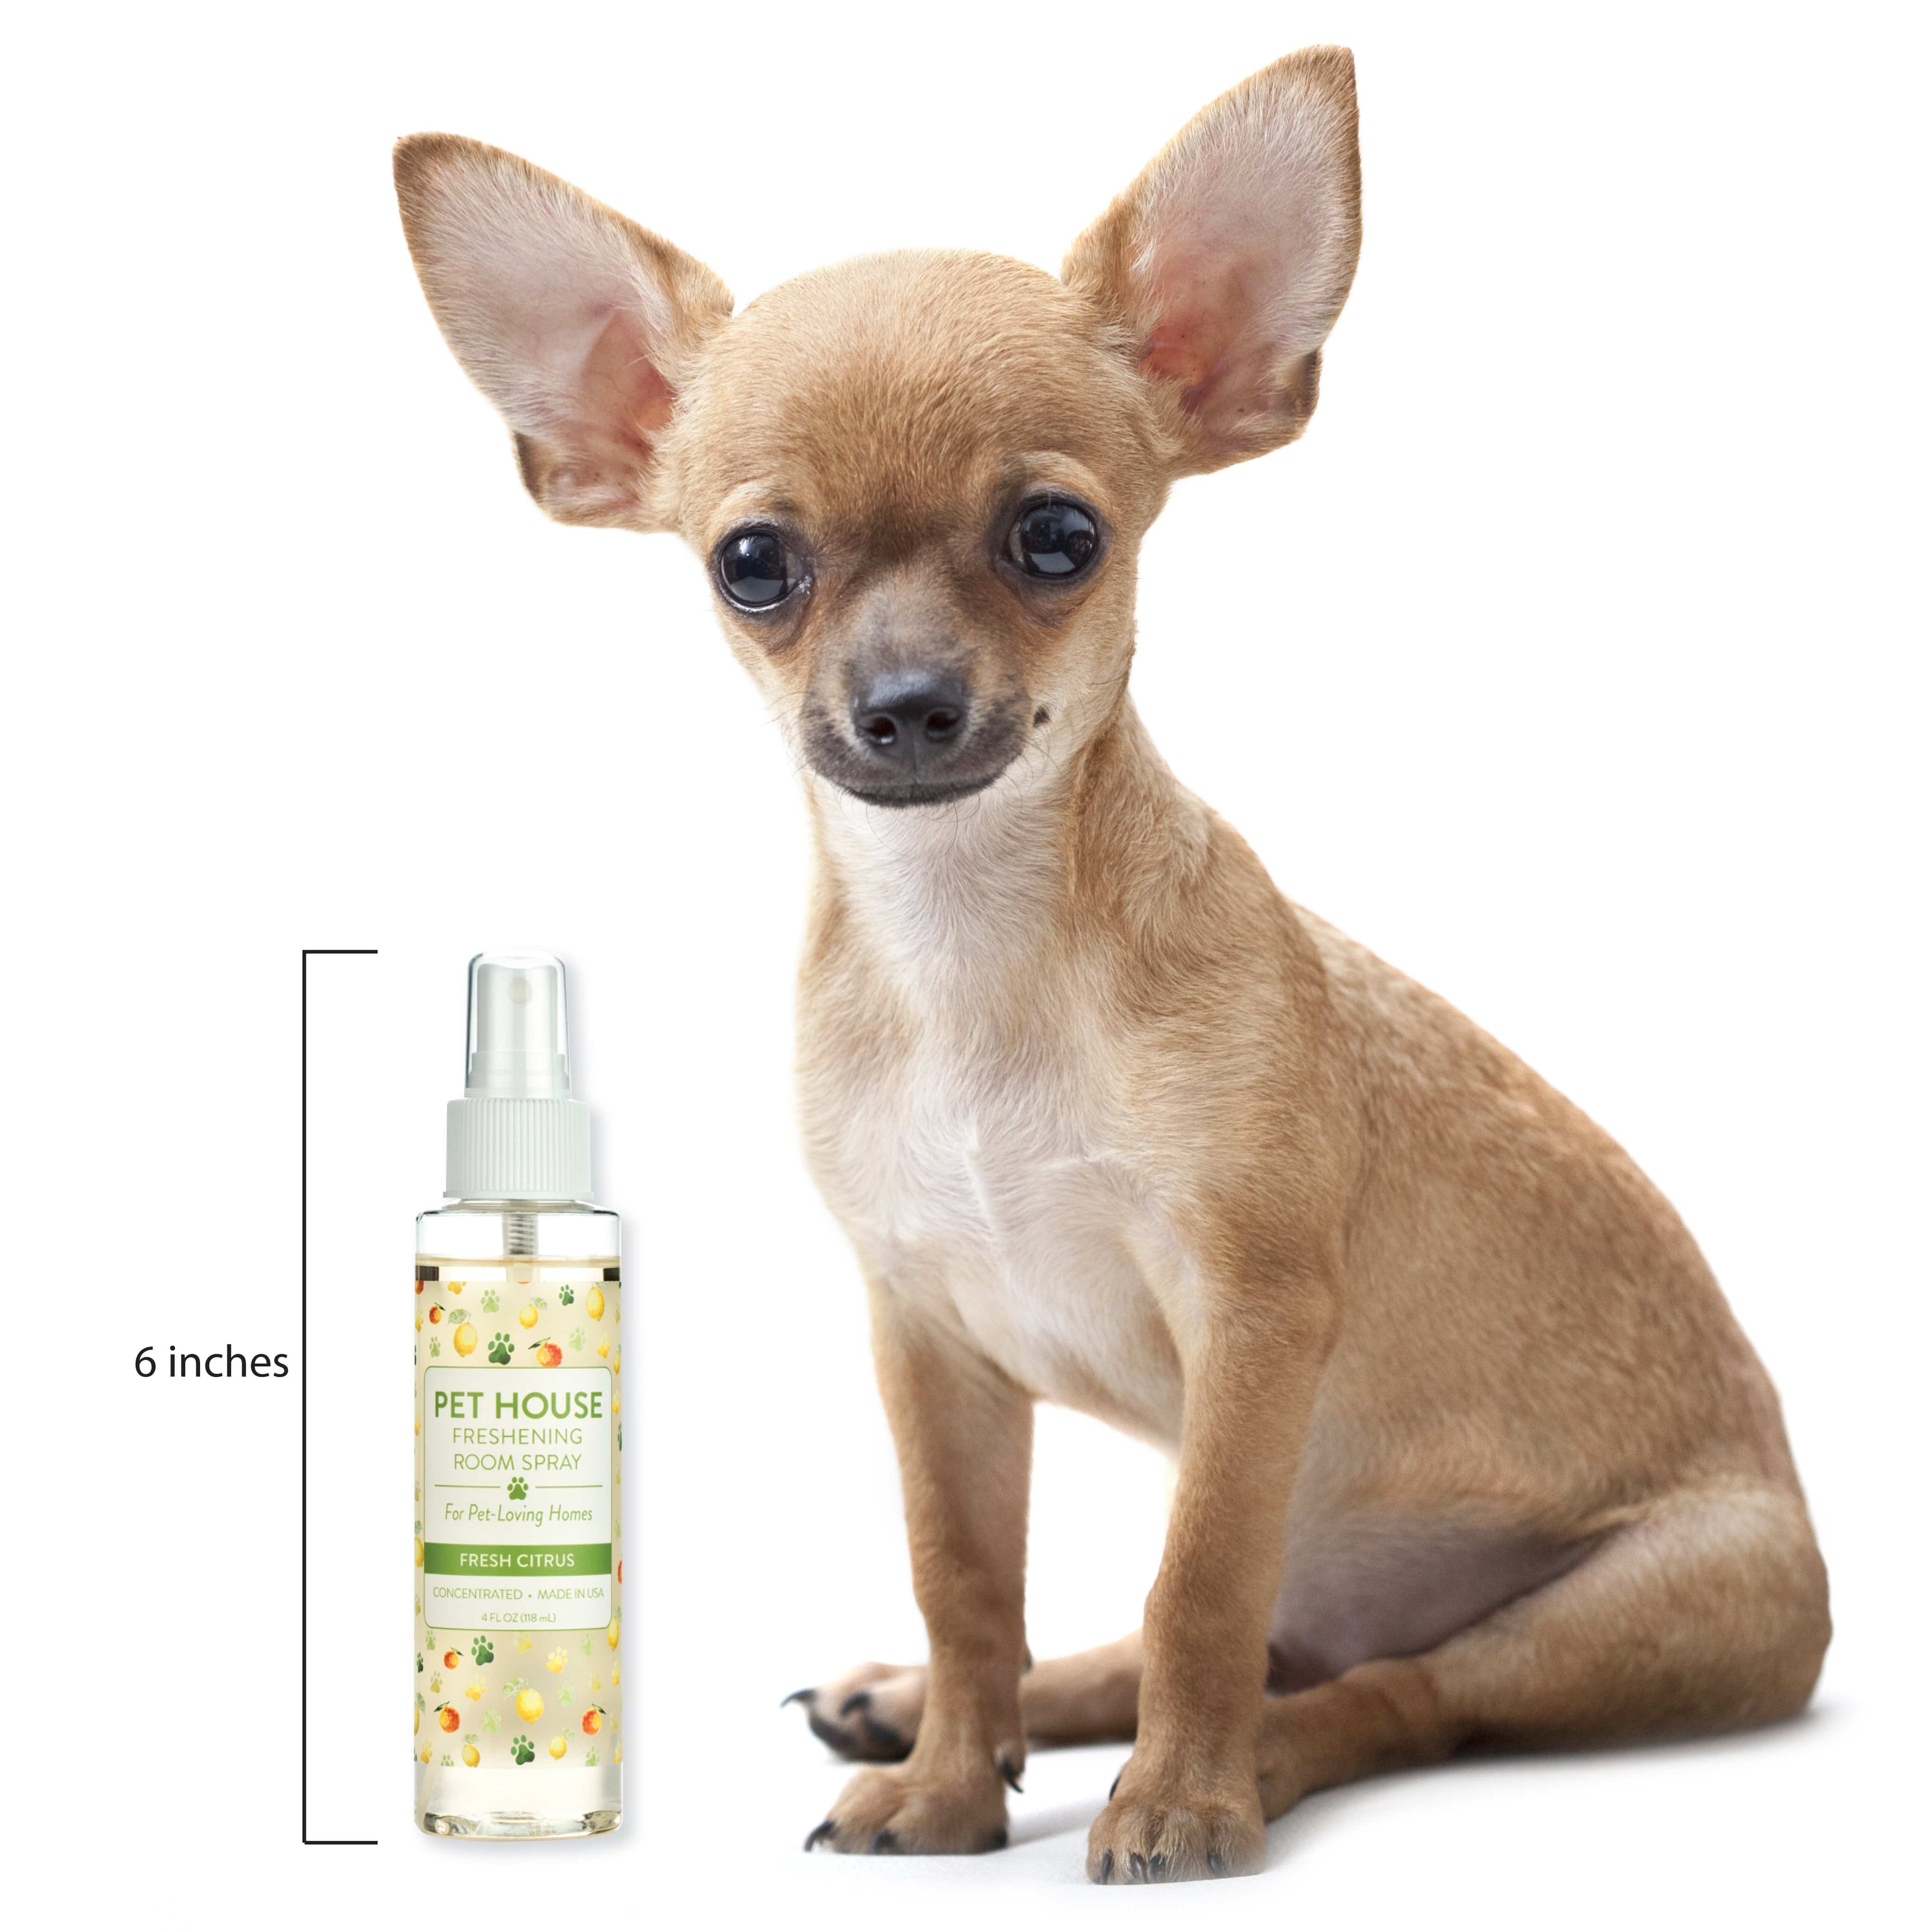 Fresh Citrus Room Spray size compared to a small dog